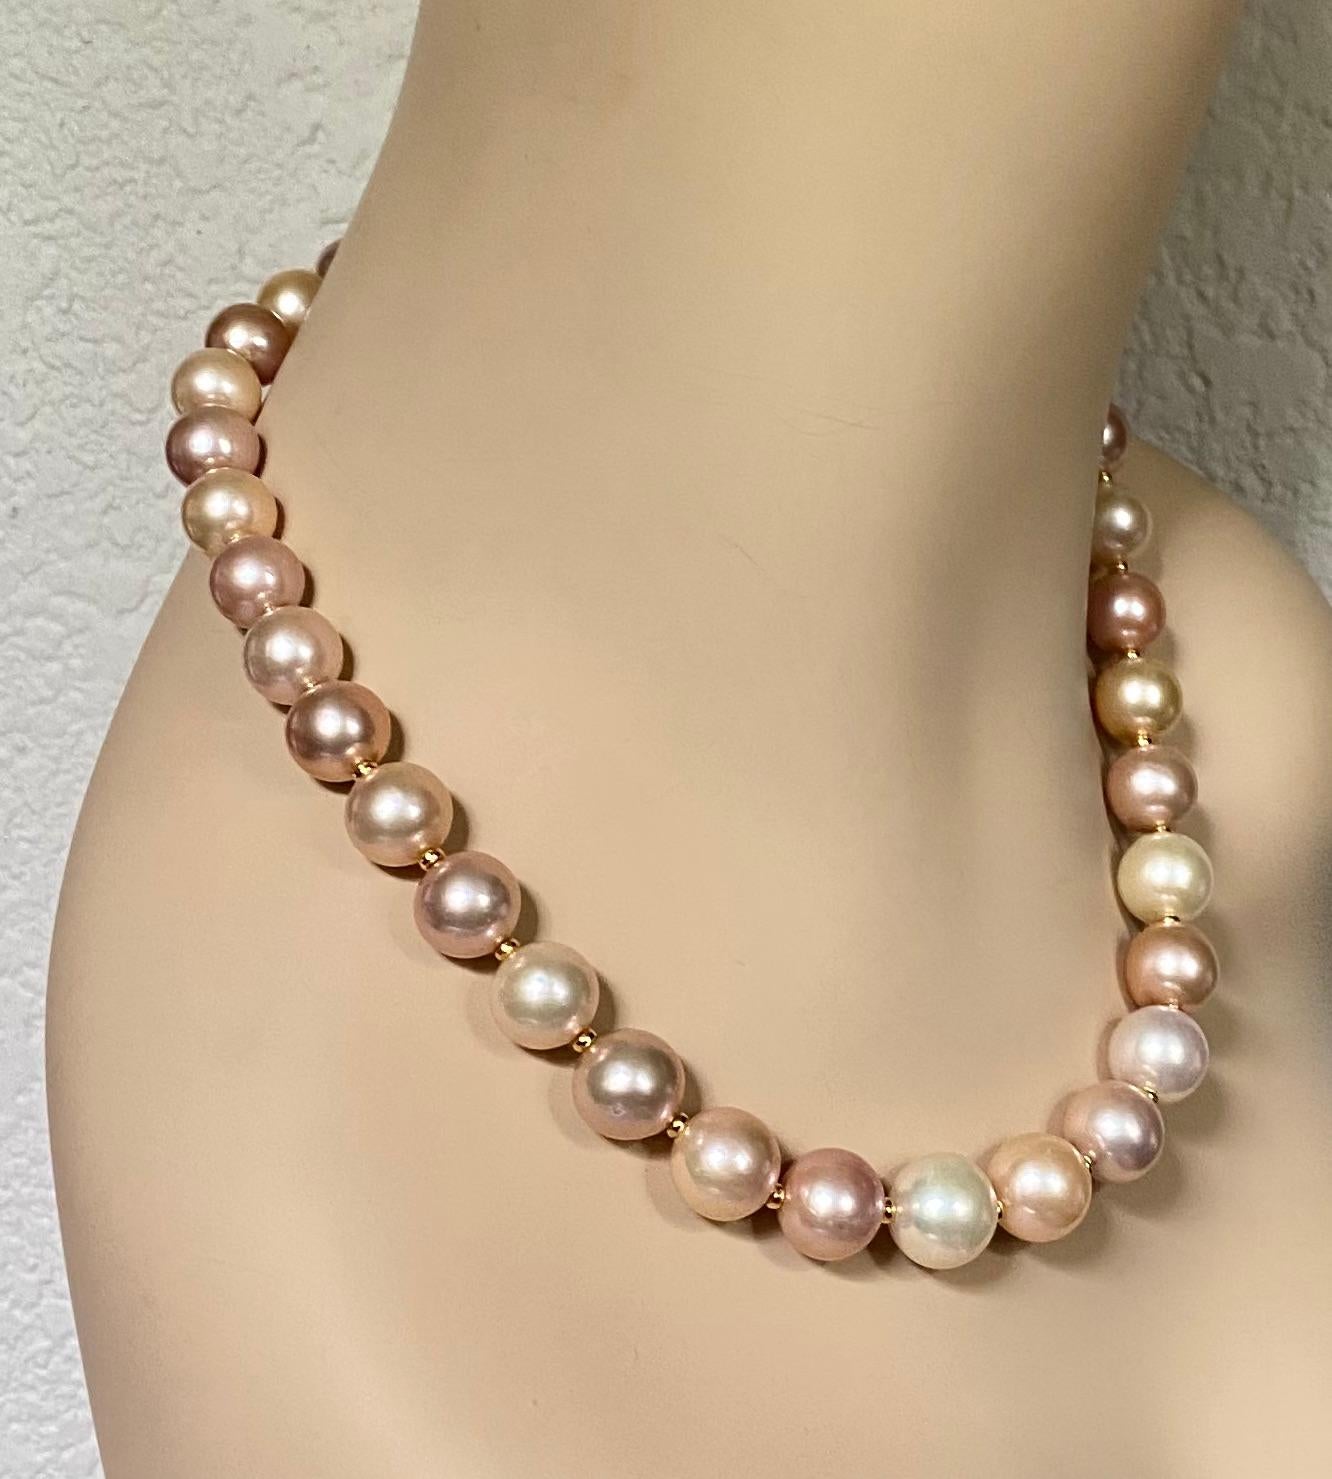 Gem quality freshwater pearls are showcased in this elegant necklace.  Thirty two pearls graduate in size from the largest at 14mm to the smallest at 12mm.  They possess rich luster and are blemish free.  The pearls are in shades and tones of cream,